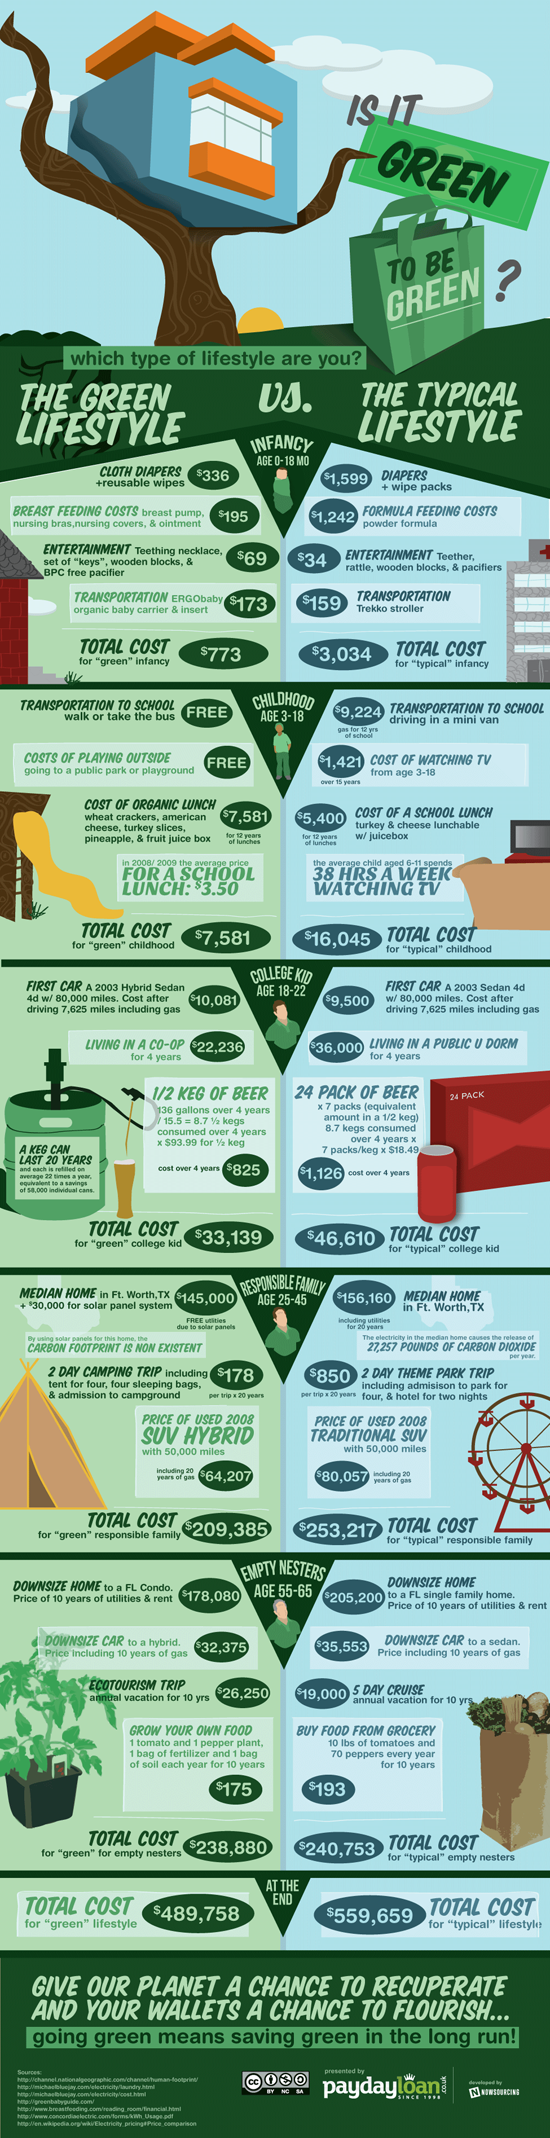 Green Lifestyle-Infographic